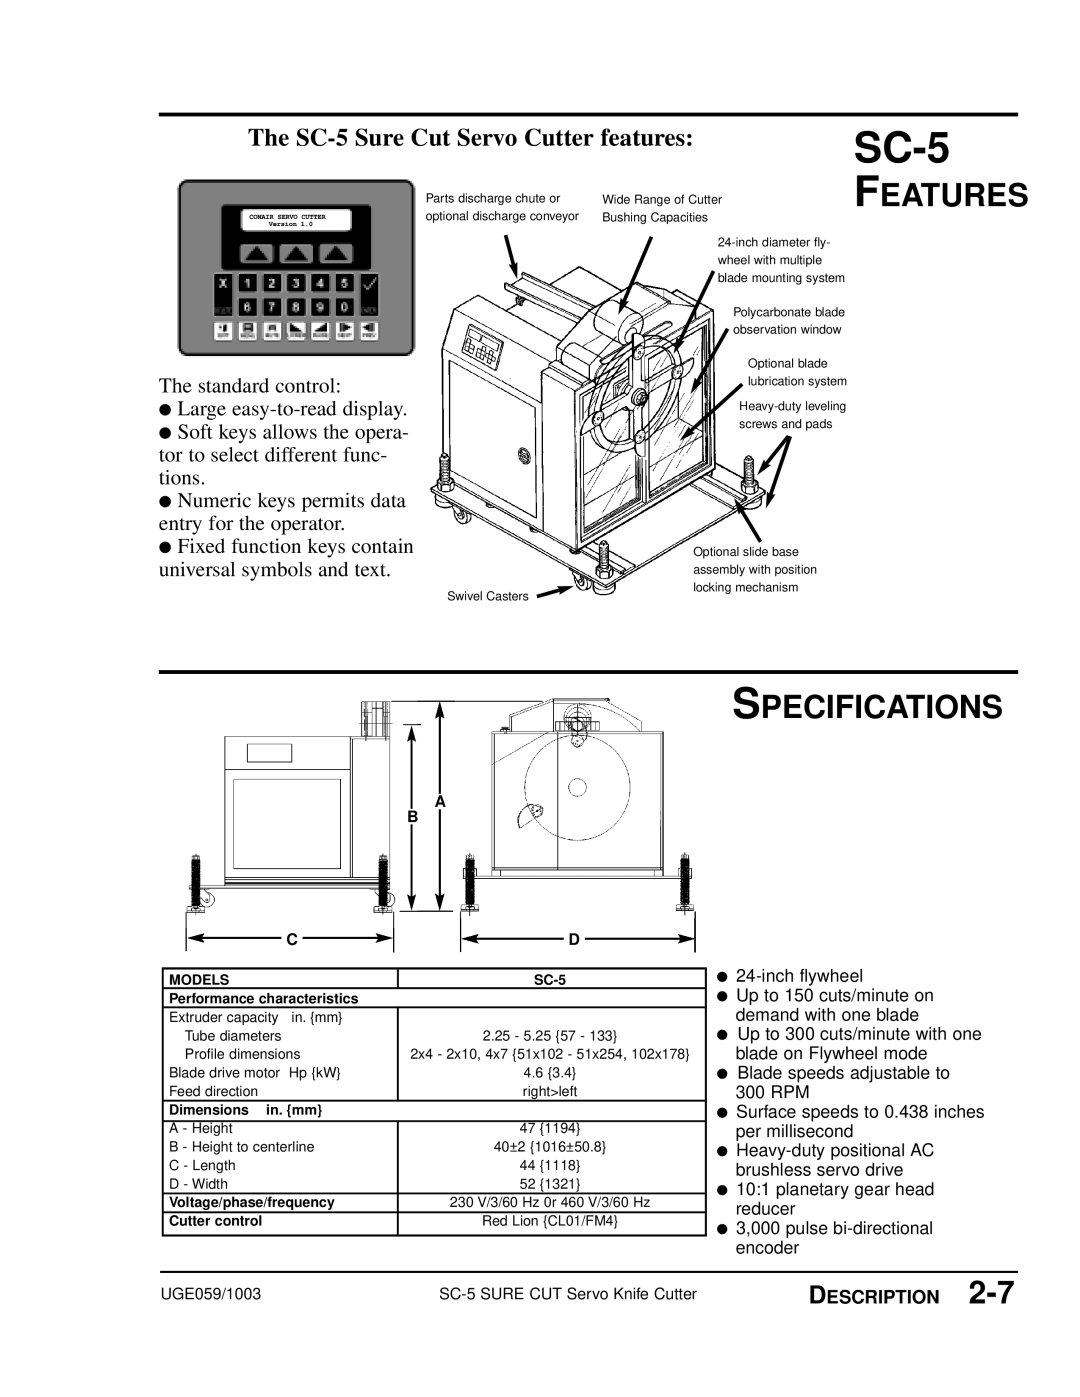 Conair manual Features, Specifications, The SC-5 Sure Cut Servo Cutter features, Description, Models, Dimensions in. mm 